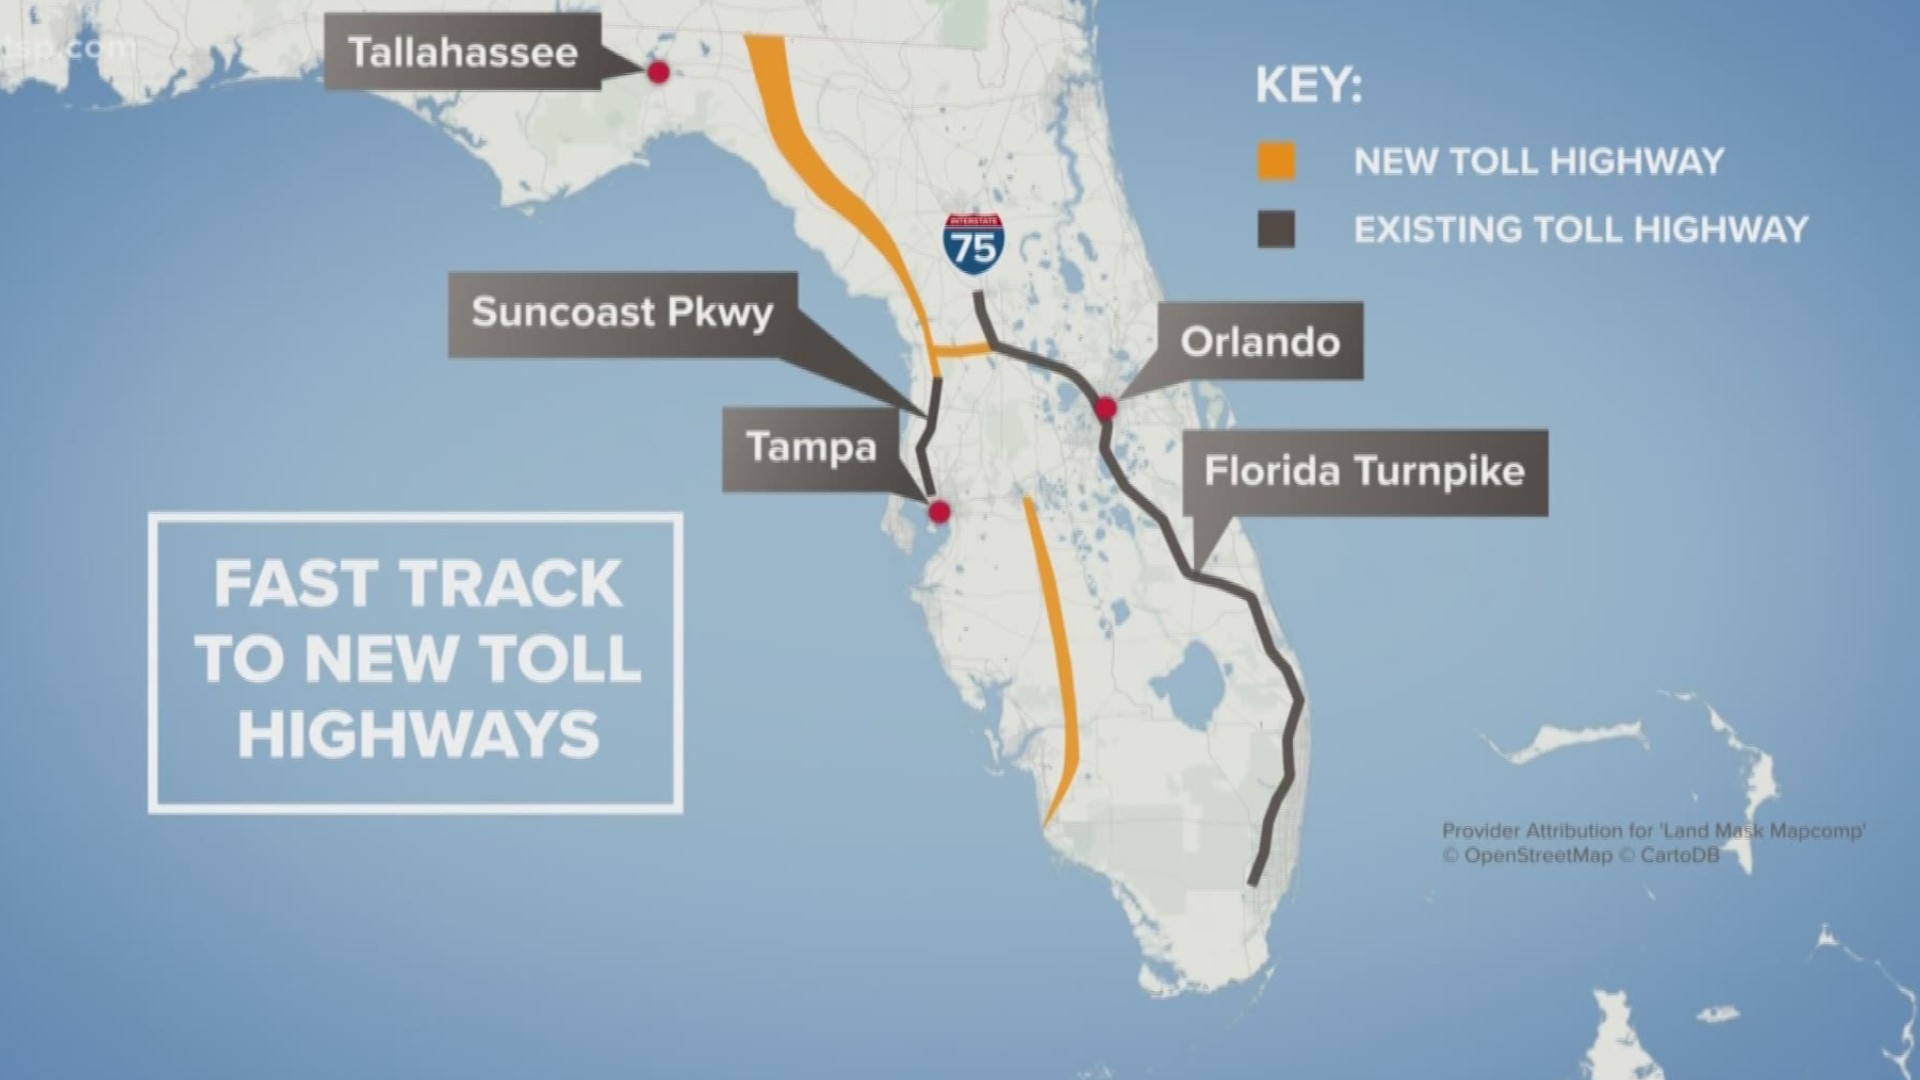 Three new toll routes are planned for Florida: One entirely new road from Polk to Collier County, an extension of the Florida Turnpike west to connect to the Suncoast Parkway and an extension of the Suncoast Parkway to the Georgia border.